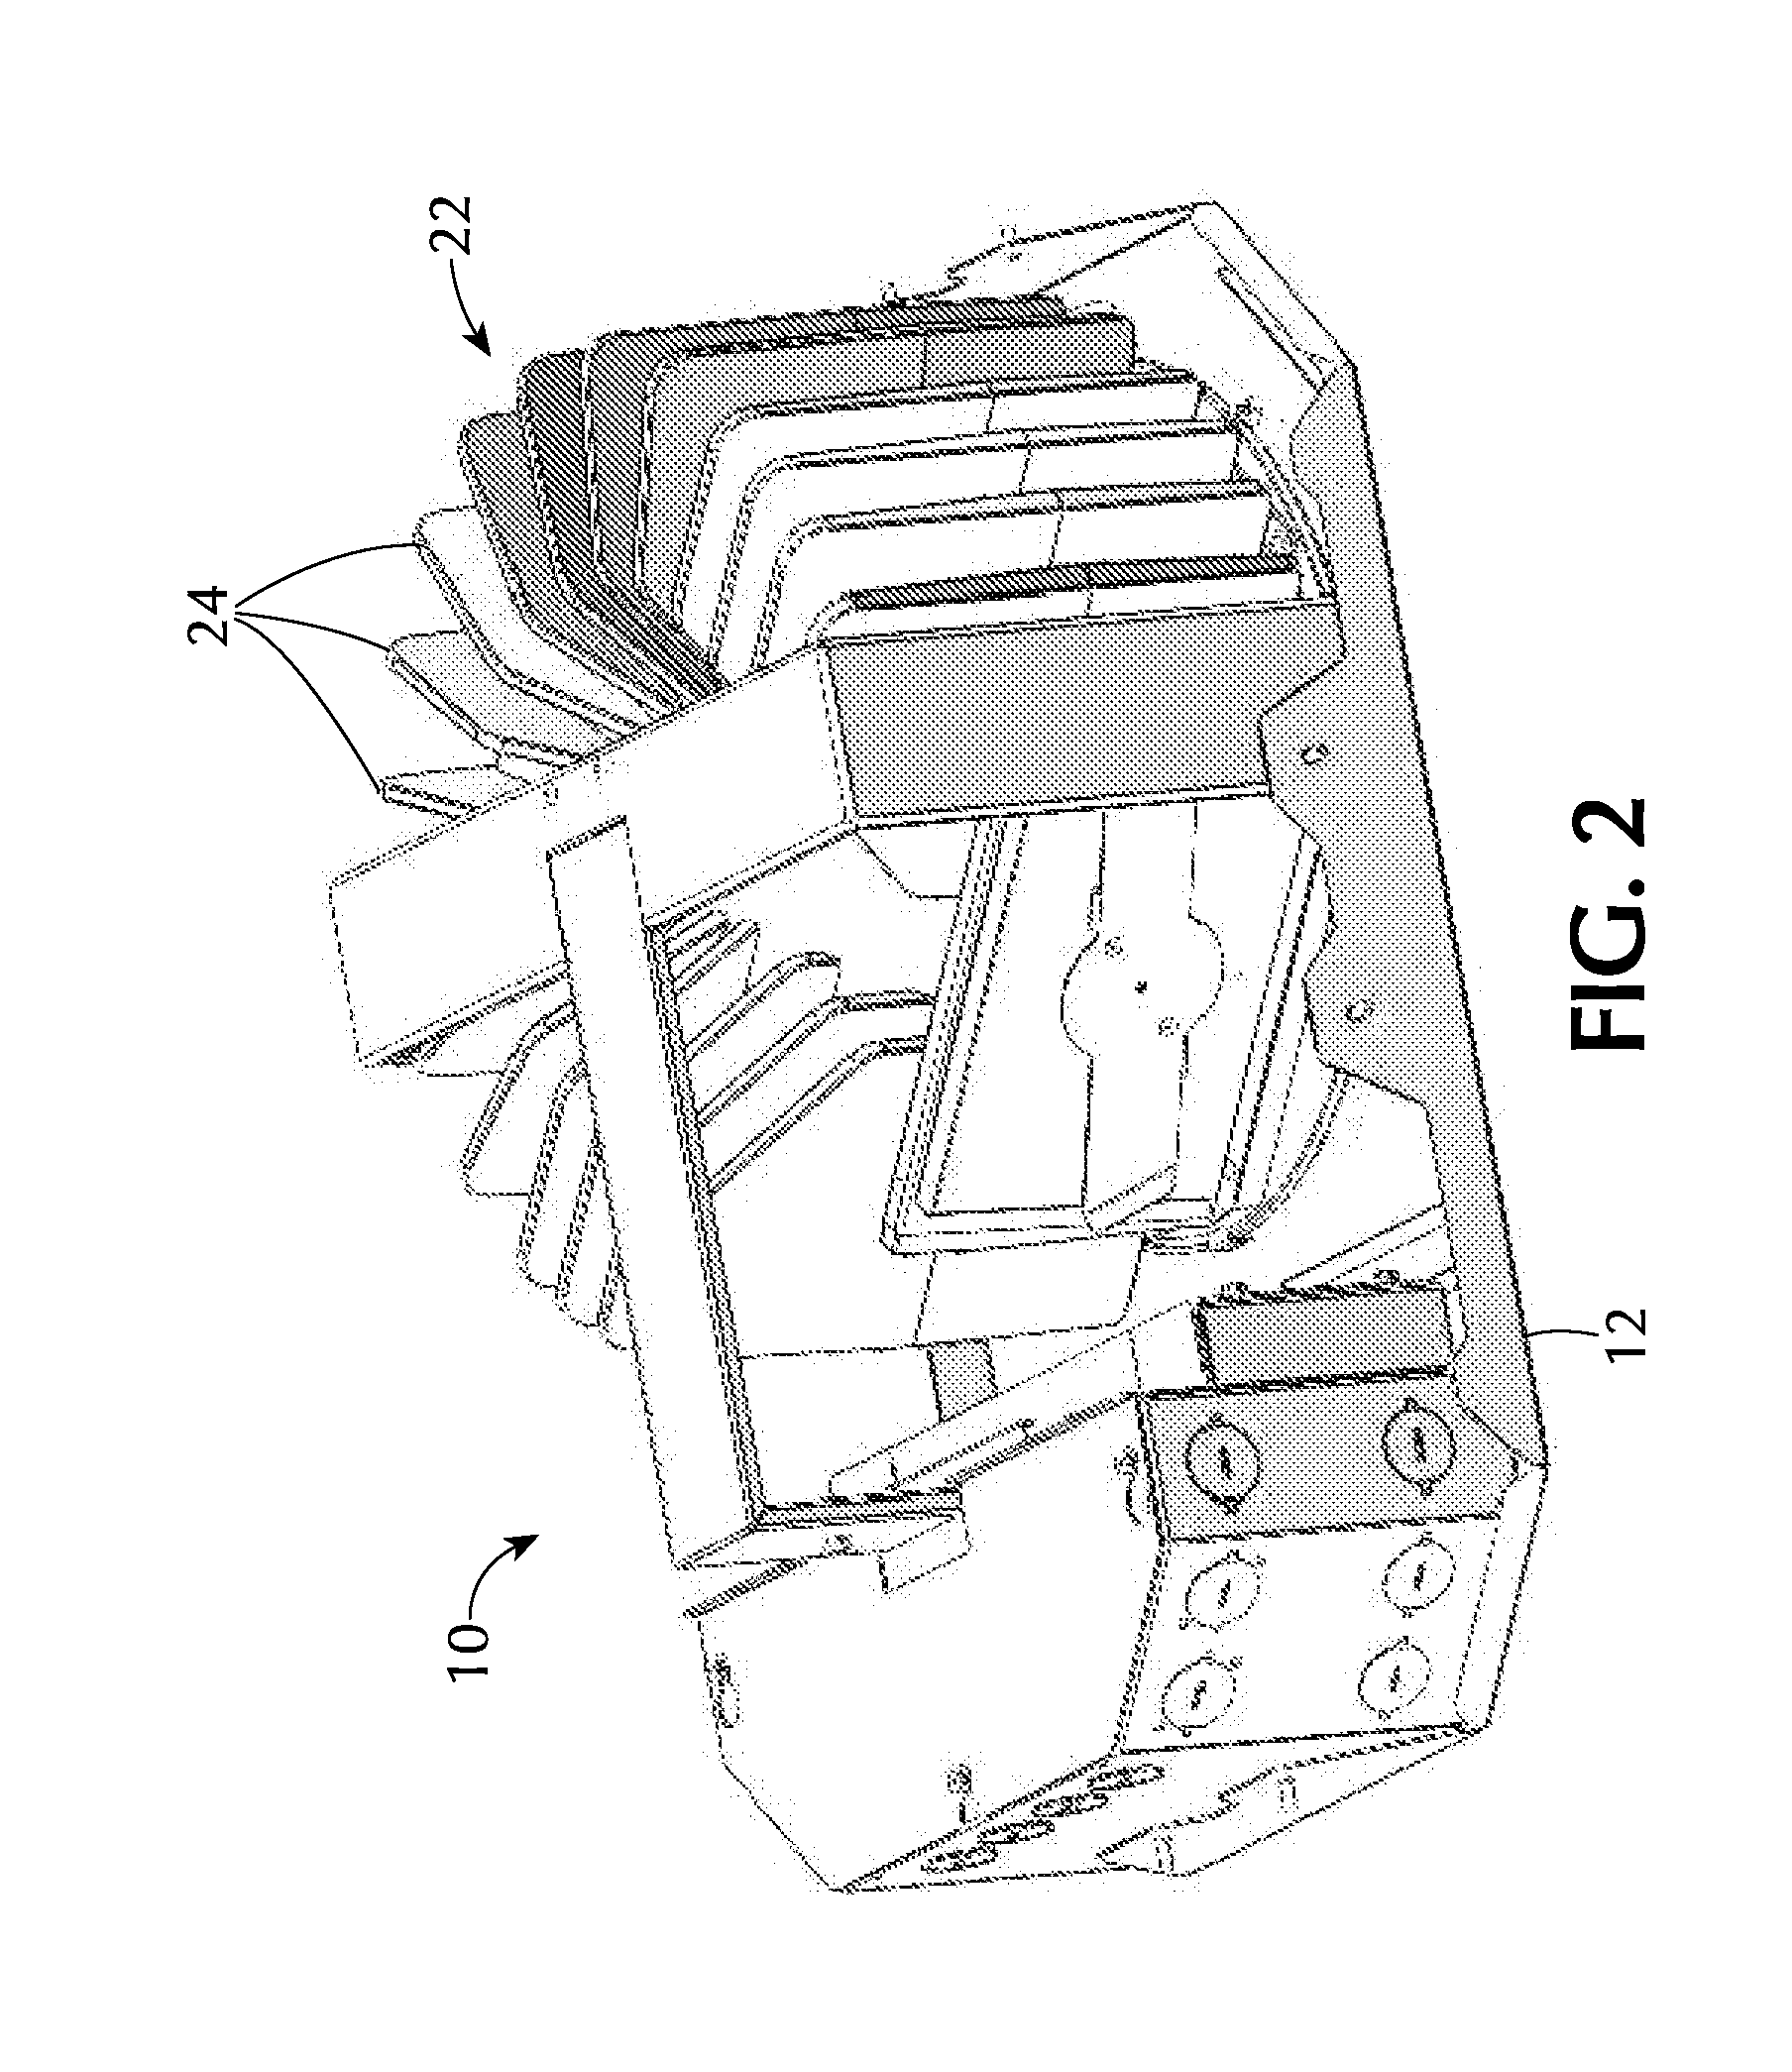 Light fixture with tilting light and fixed heat sink